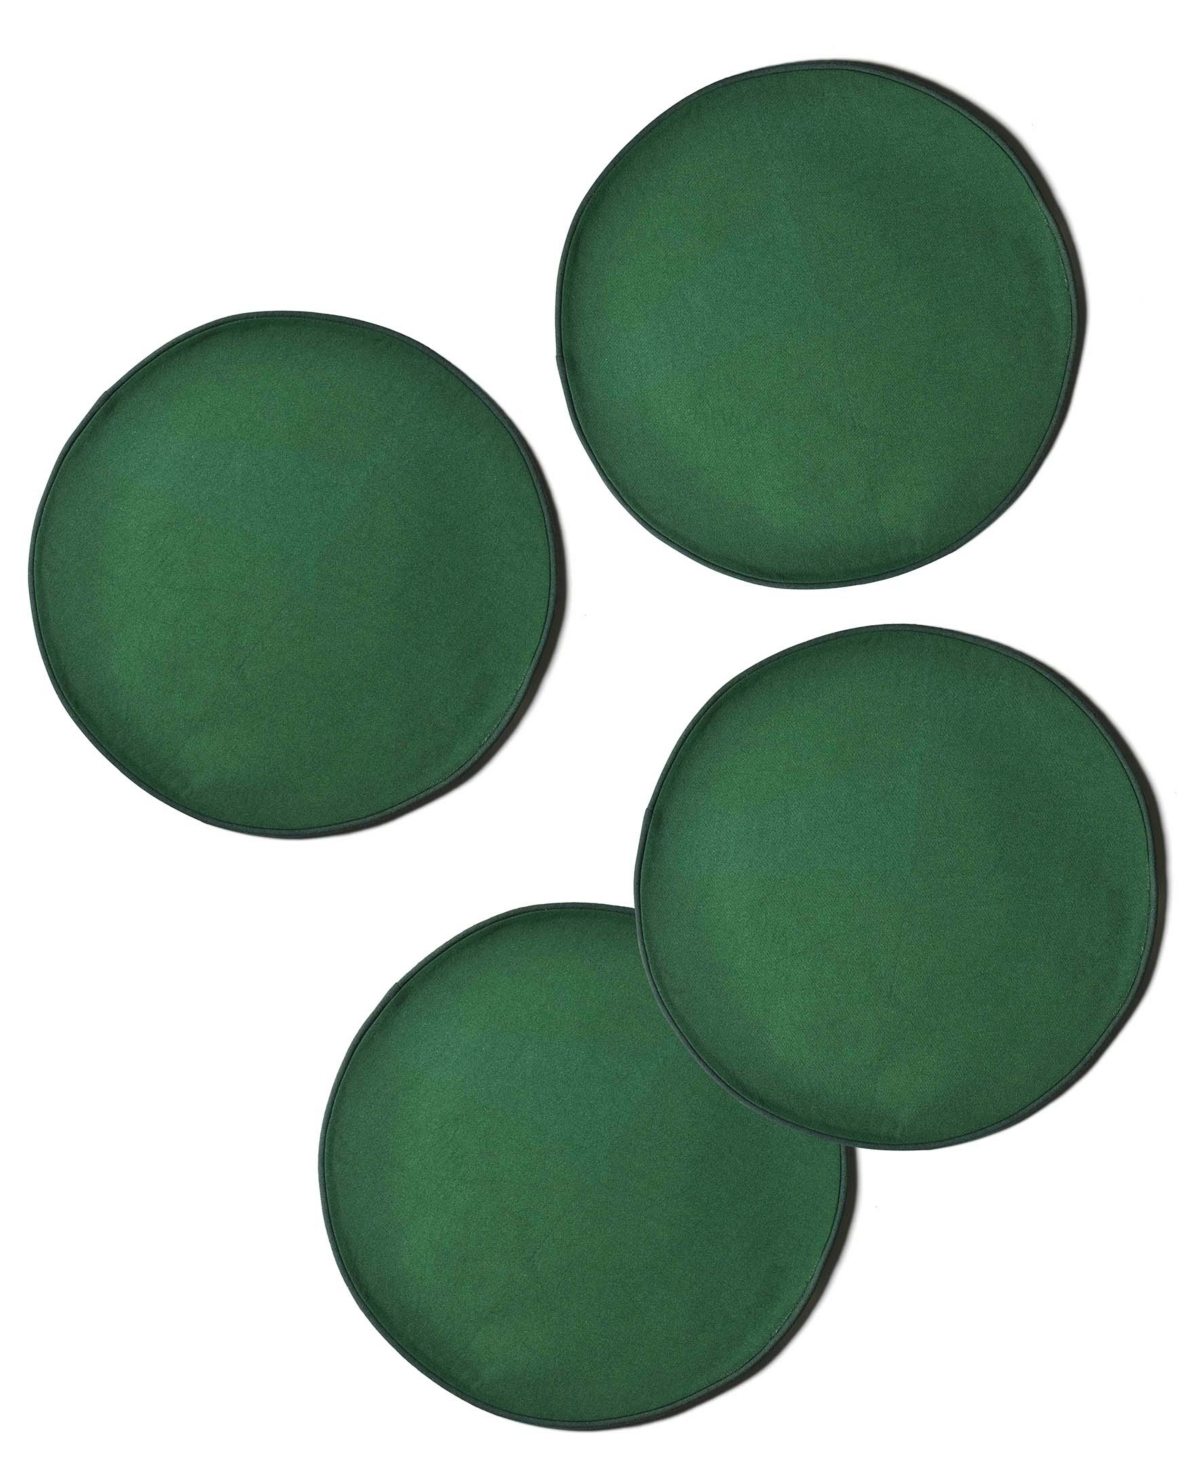 Coton Colors Block Round Placemat Set Of 4, Service For 4 In Pine